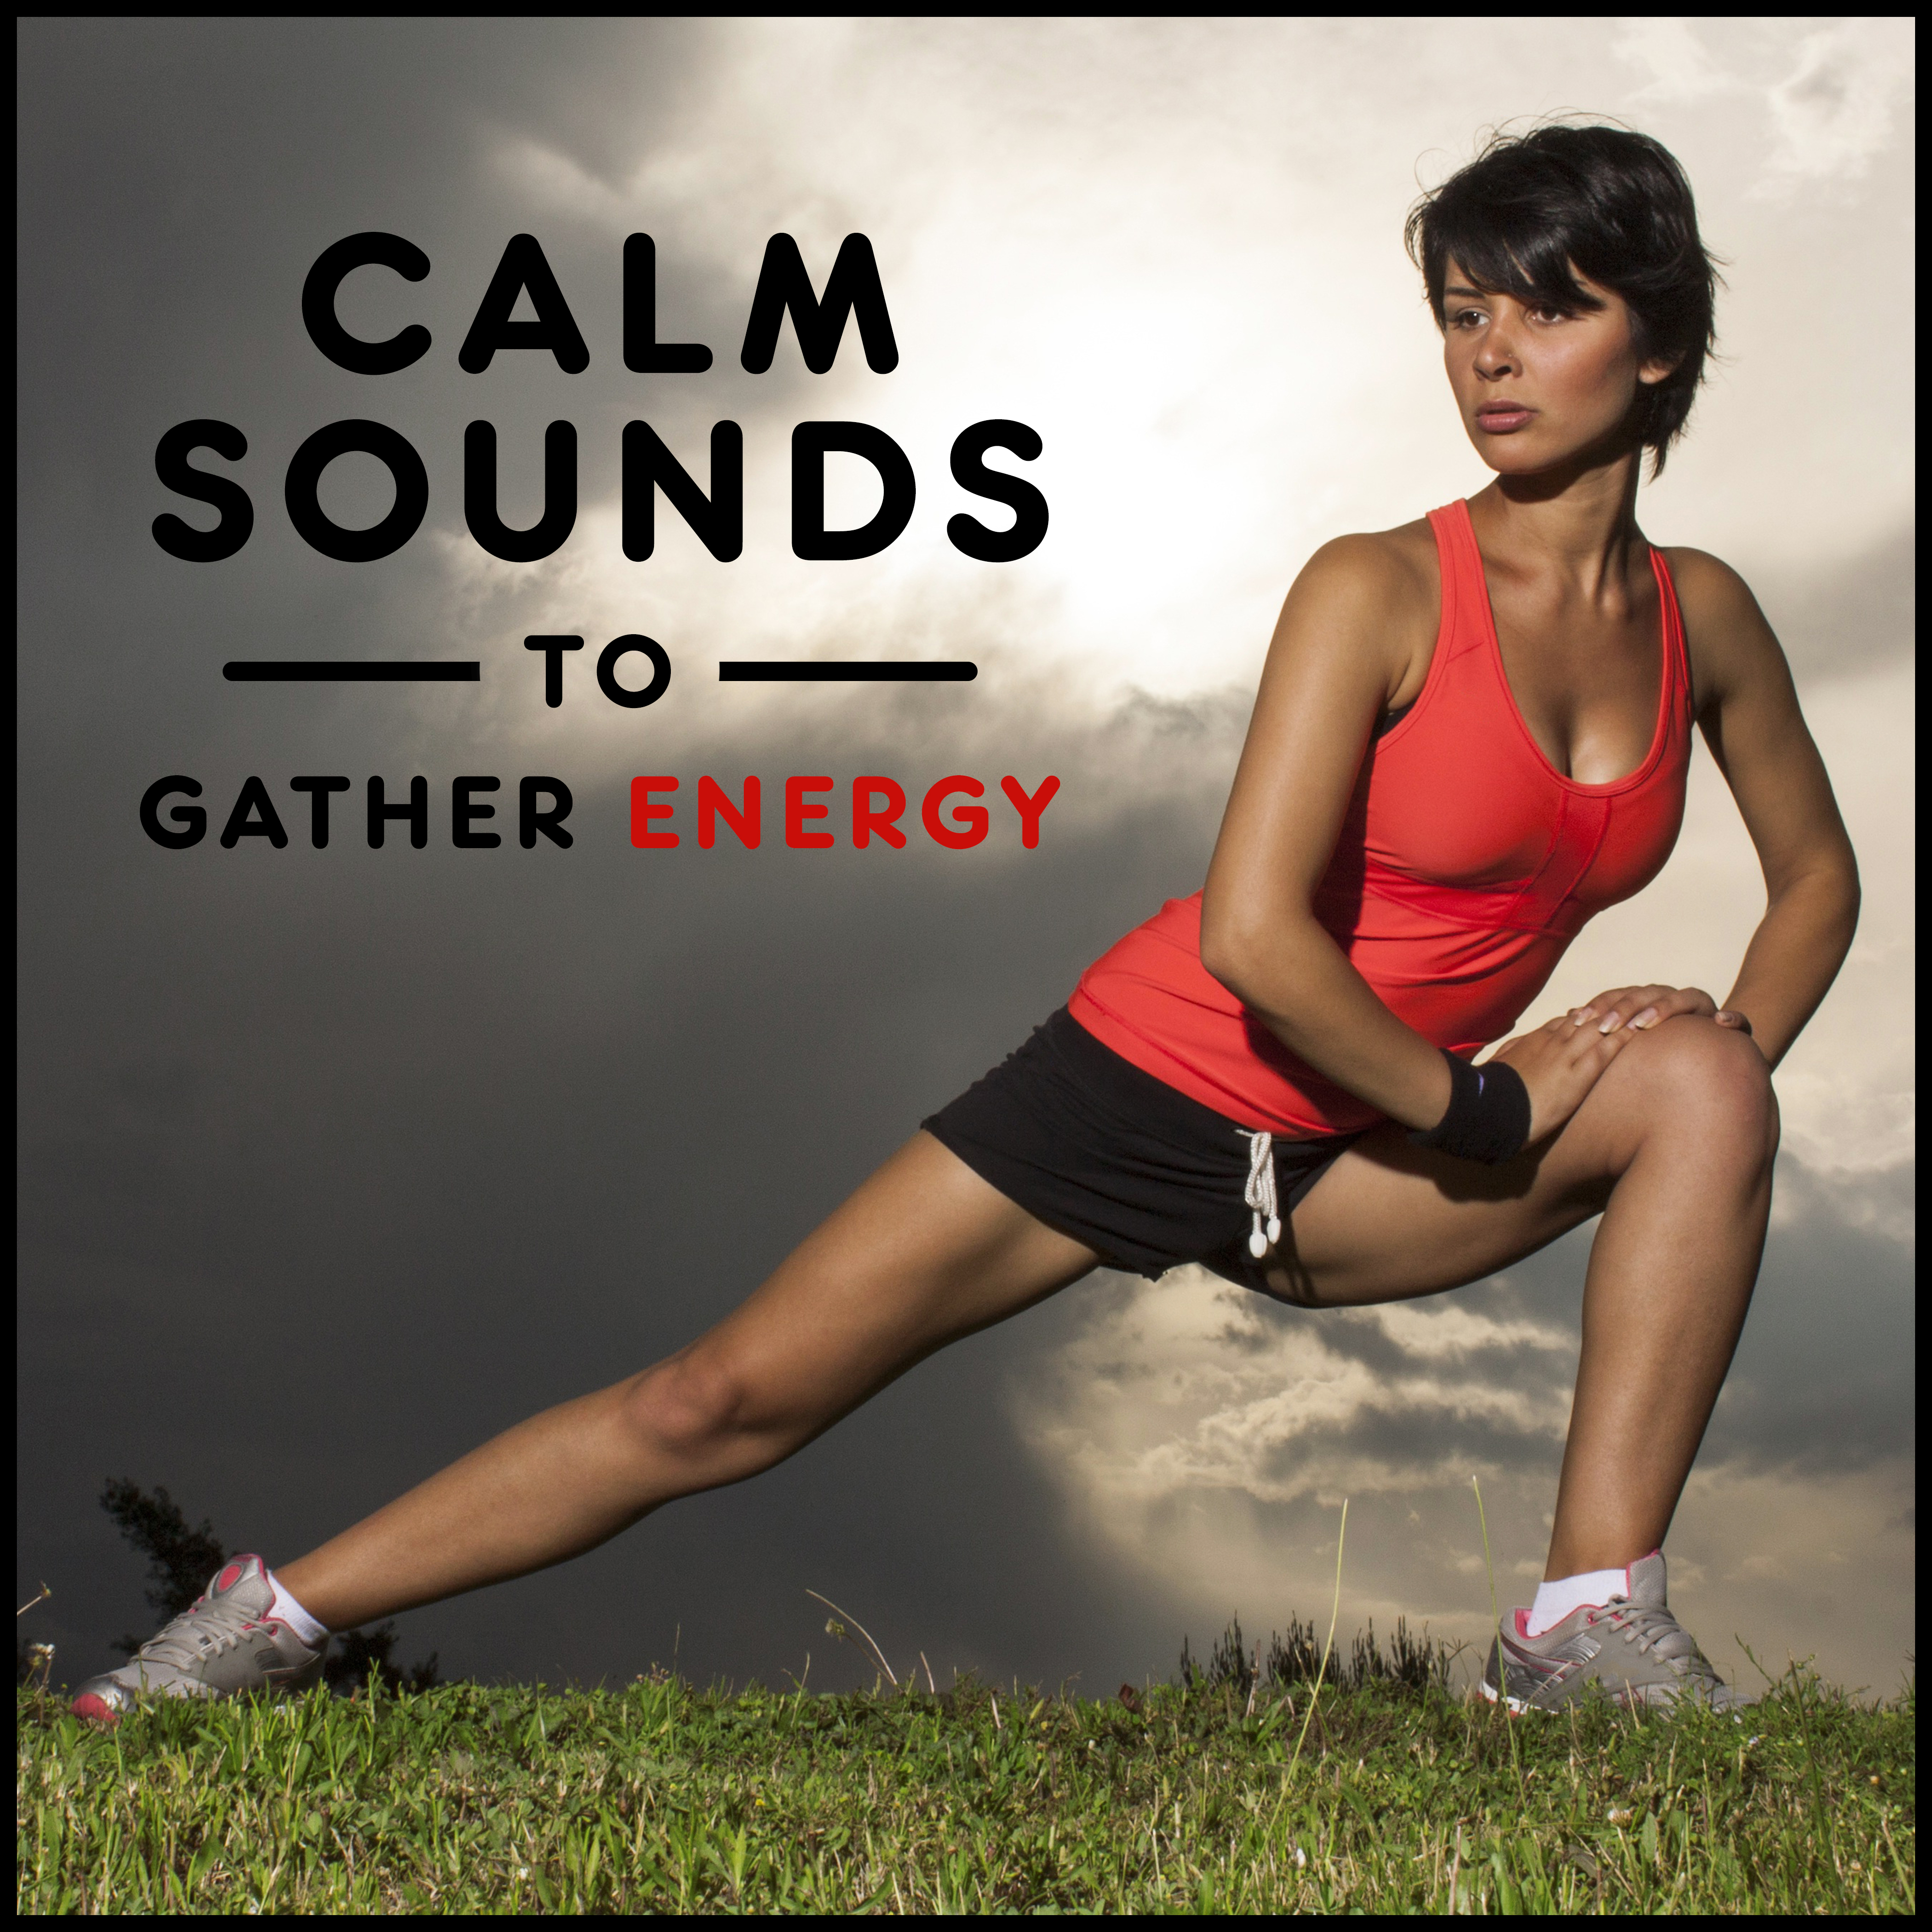 Calm Sounds to Gather Energy – Relaxing New Age Music, Meditation Sounds, Peaceful Waves, Zen Garden